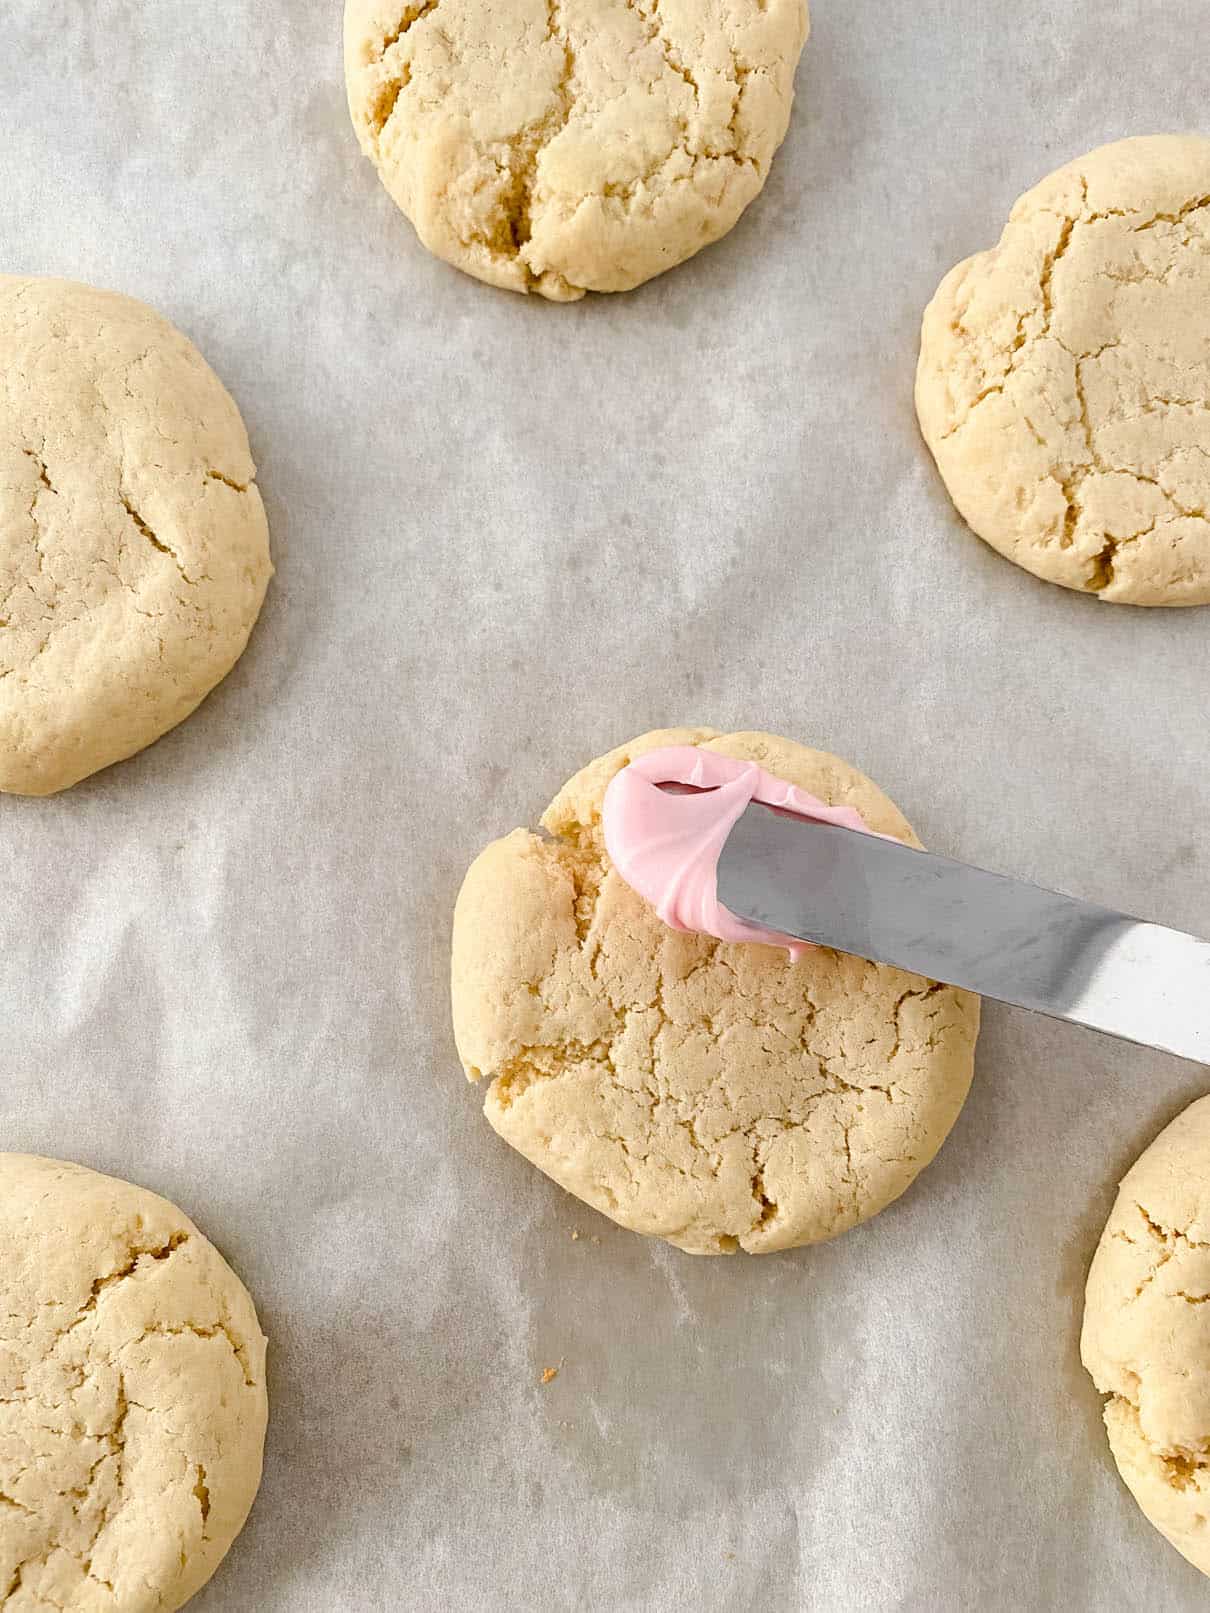 Frosting sugar cookies with pink almond buttercream using an offset spatula